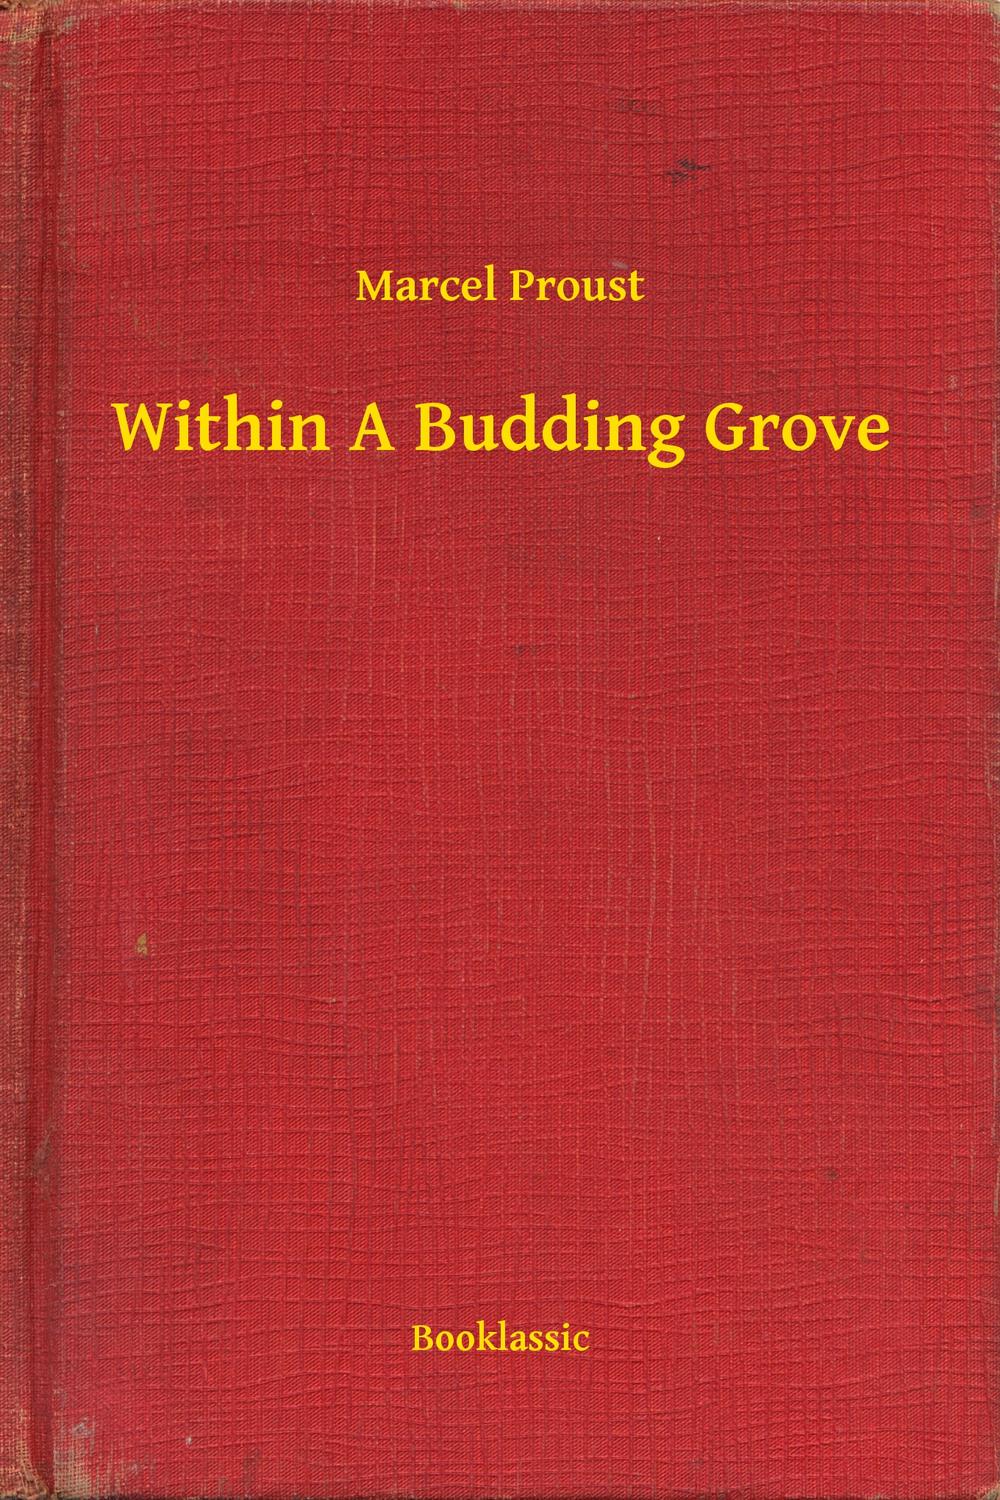 Within A Budding Grove - Marcel Proust,,